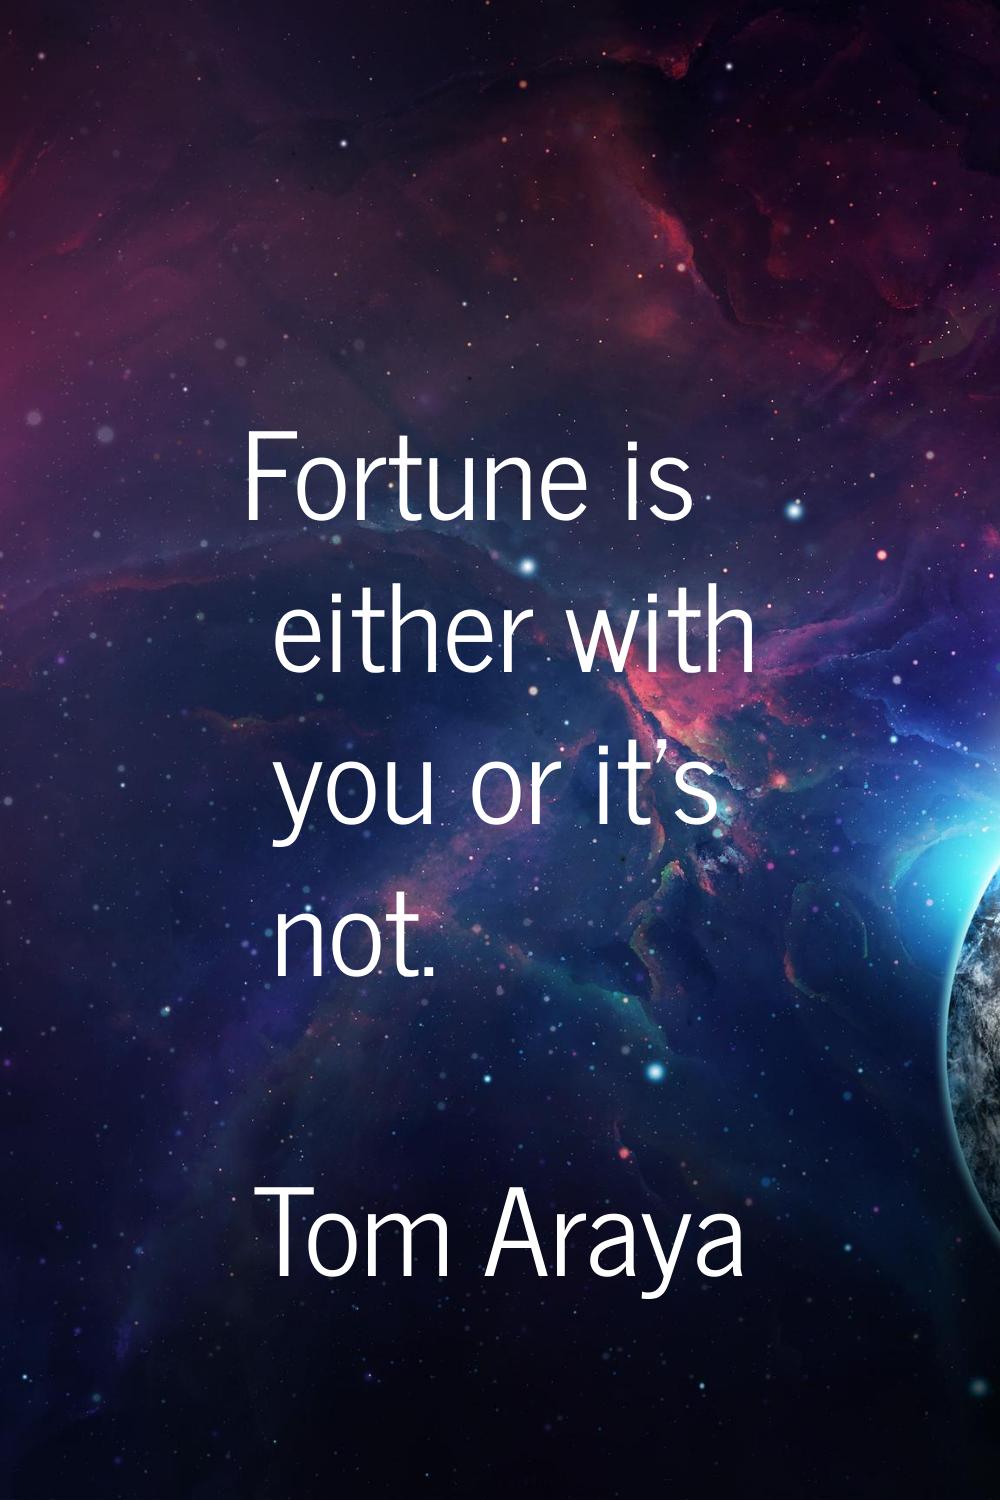 Fortune is either with you or it's not.